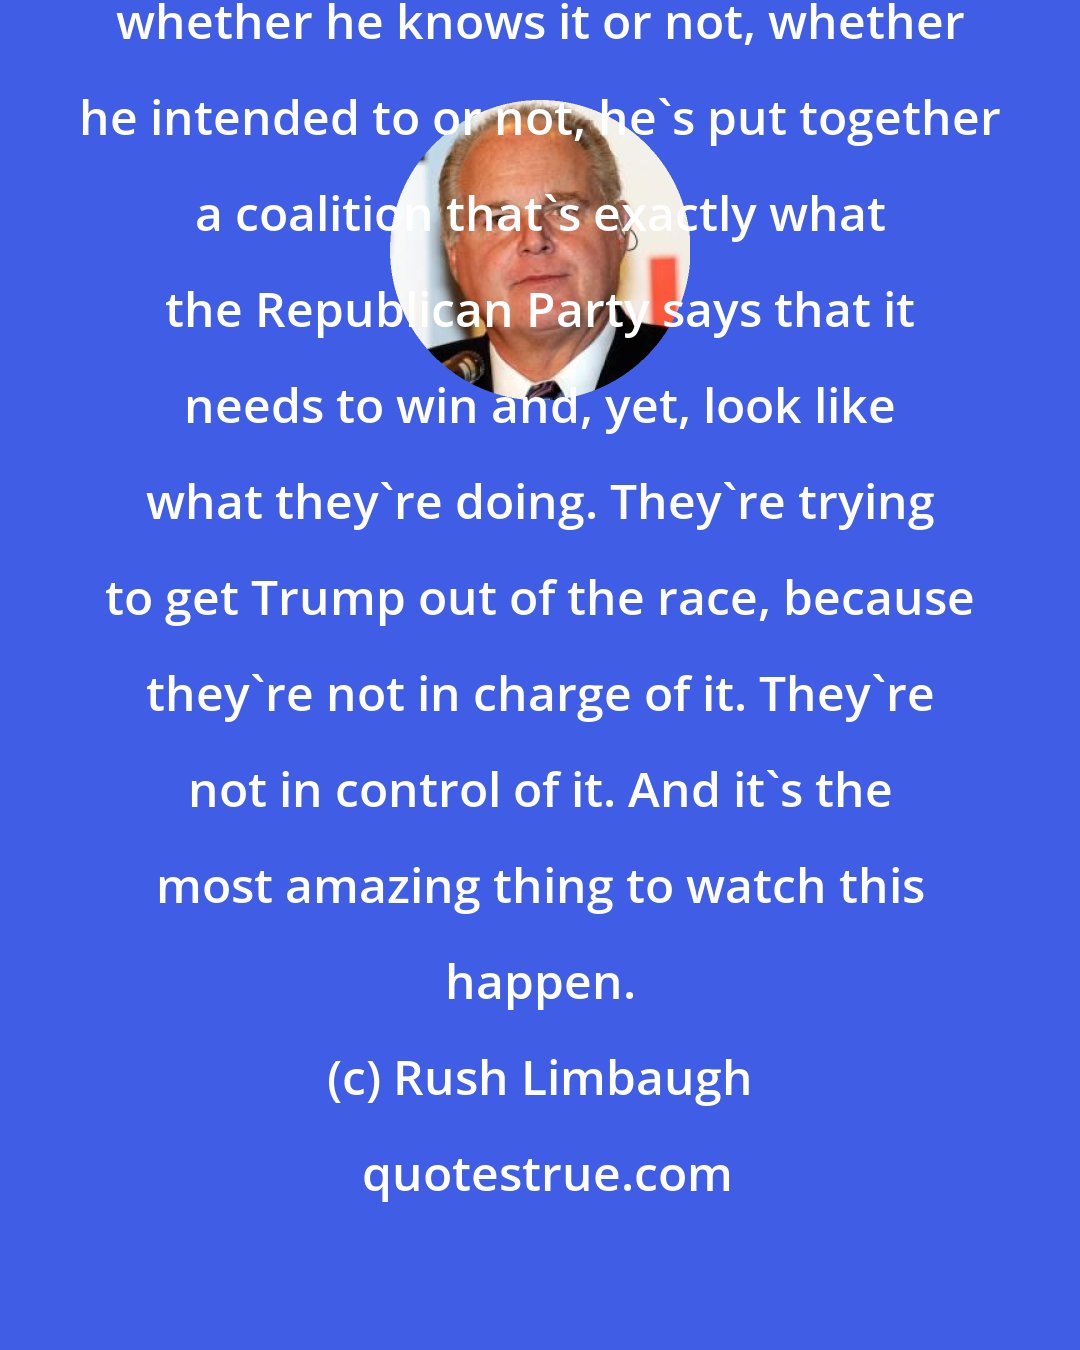 Rush Limbaugh: Donald Trump has put together a coalition, whether he knows it or not, whether he intended to or not, he's put together a coalition that's exactly what the Republican Party says that it needs to win and, yet, look like what they're doing. They're trying to get Trump out of the race, because they're not in charge of it. They're not in control of it. And it's the most amazing thing to watch this happen.